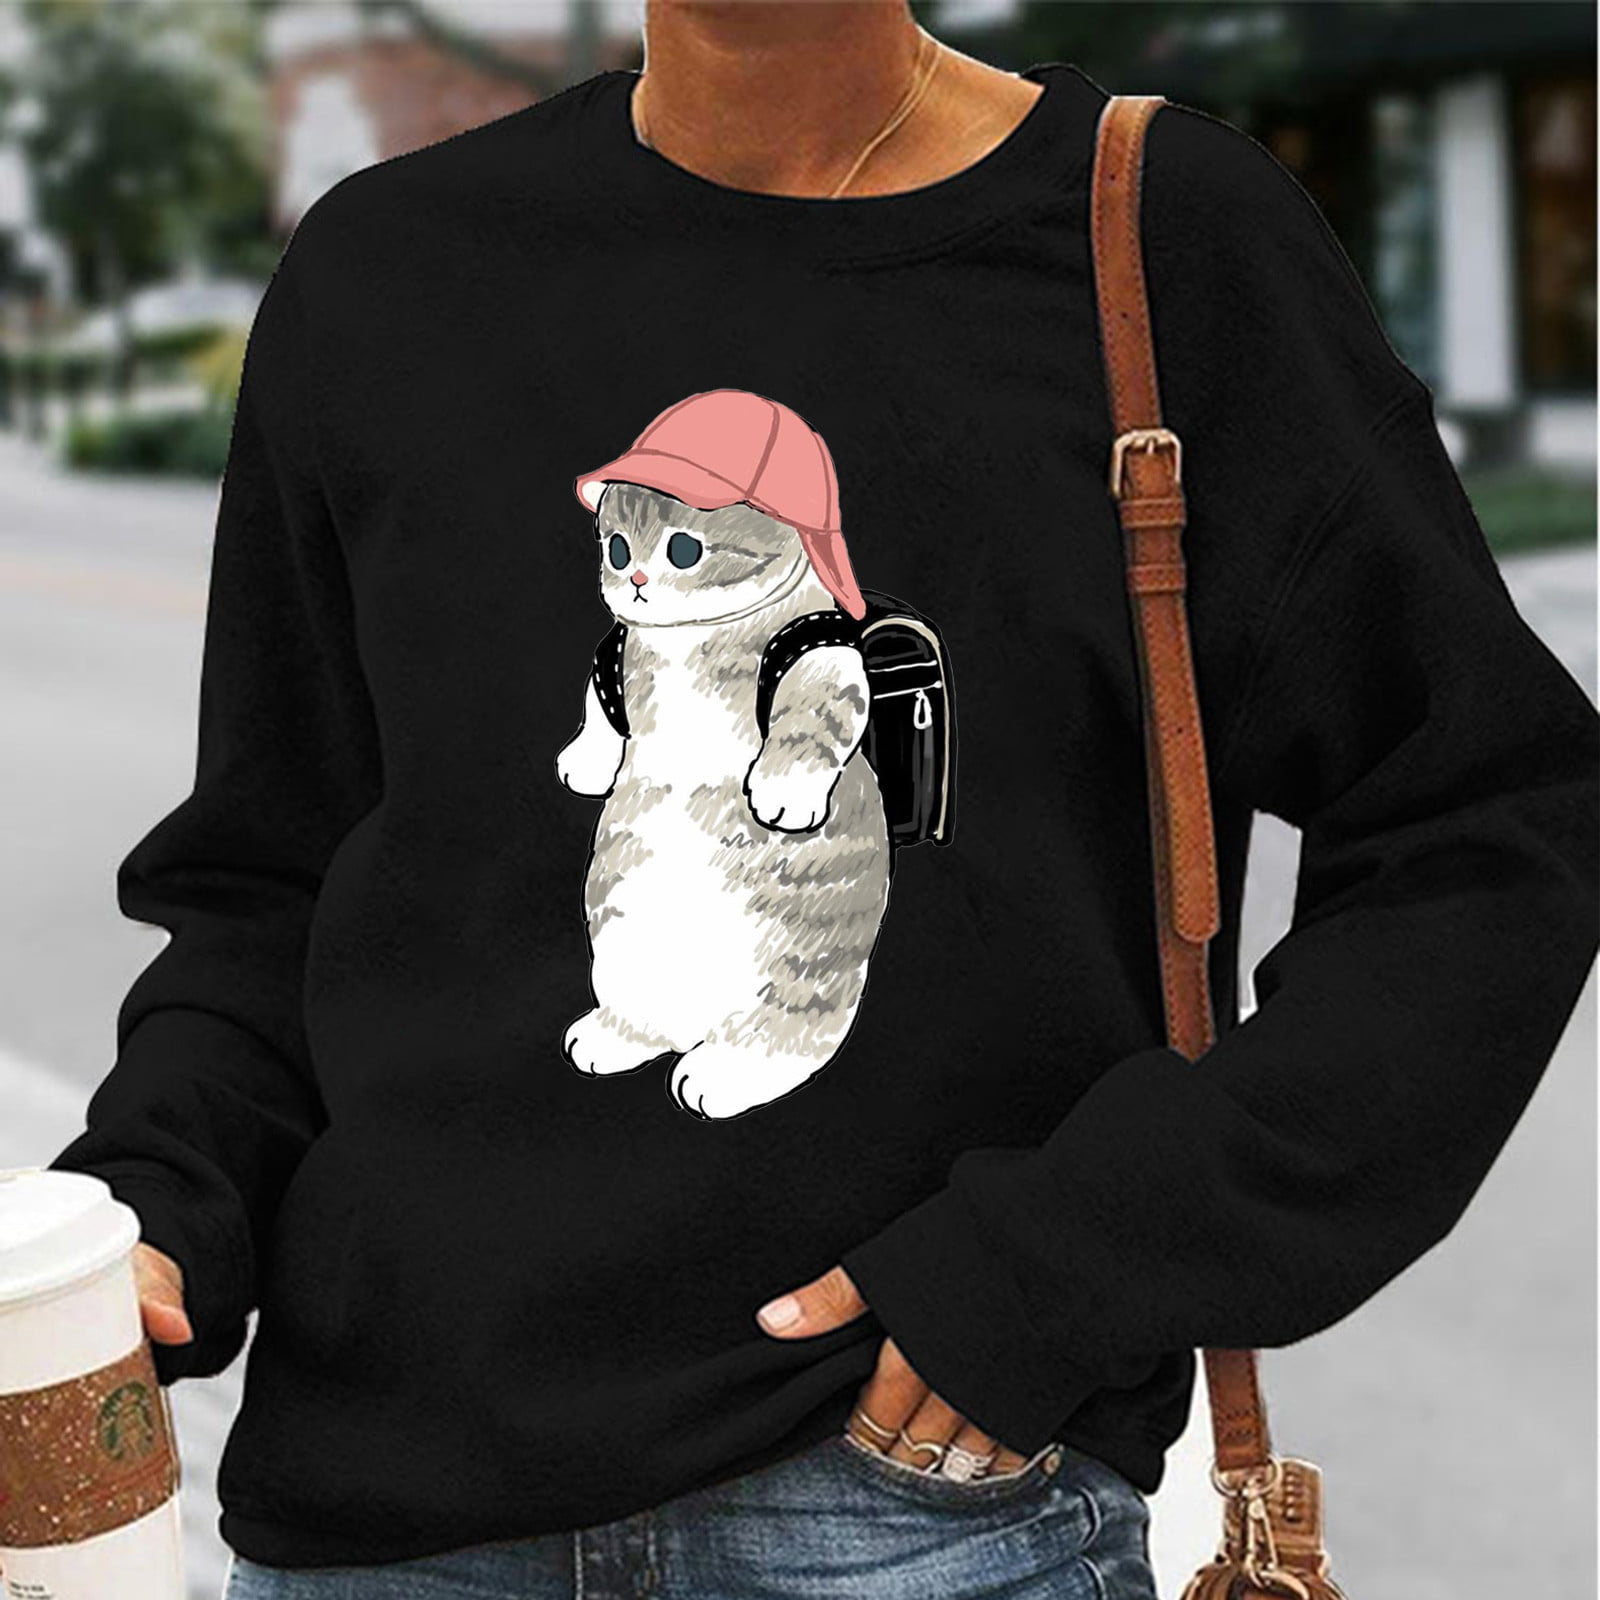 OKBOP Converse High Tops,Fashion Casual O-Neck Animal Cat Printing  Long-Sleeved Sweatshirt Ladies Tops And Blouses White Shirts for Women -  